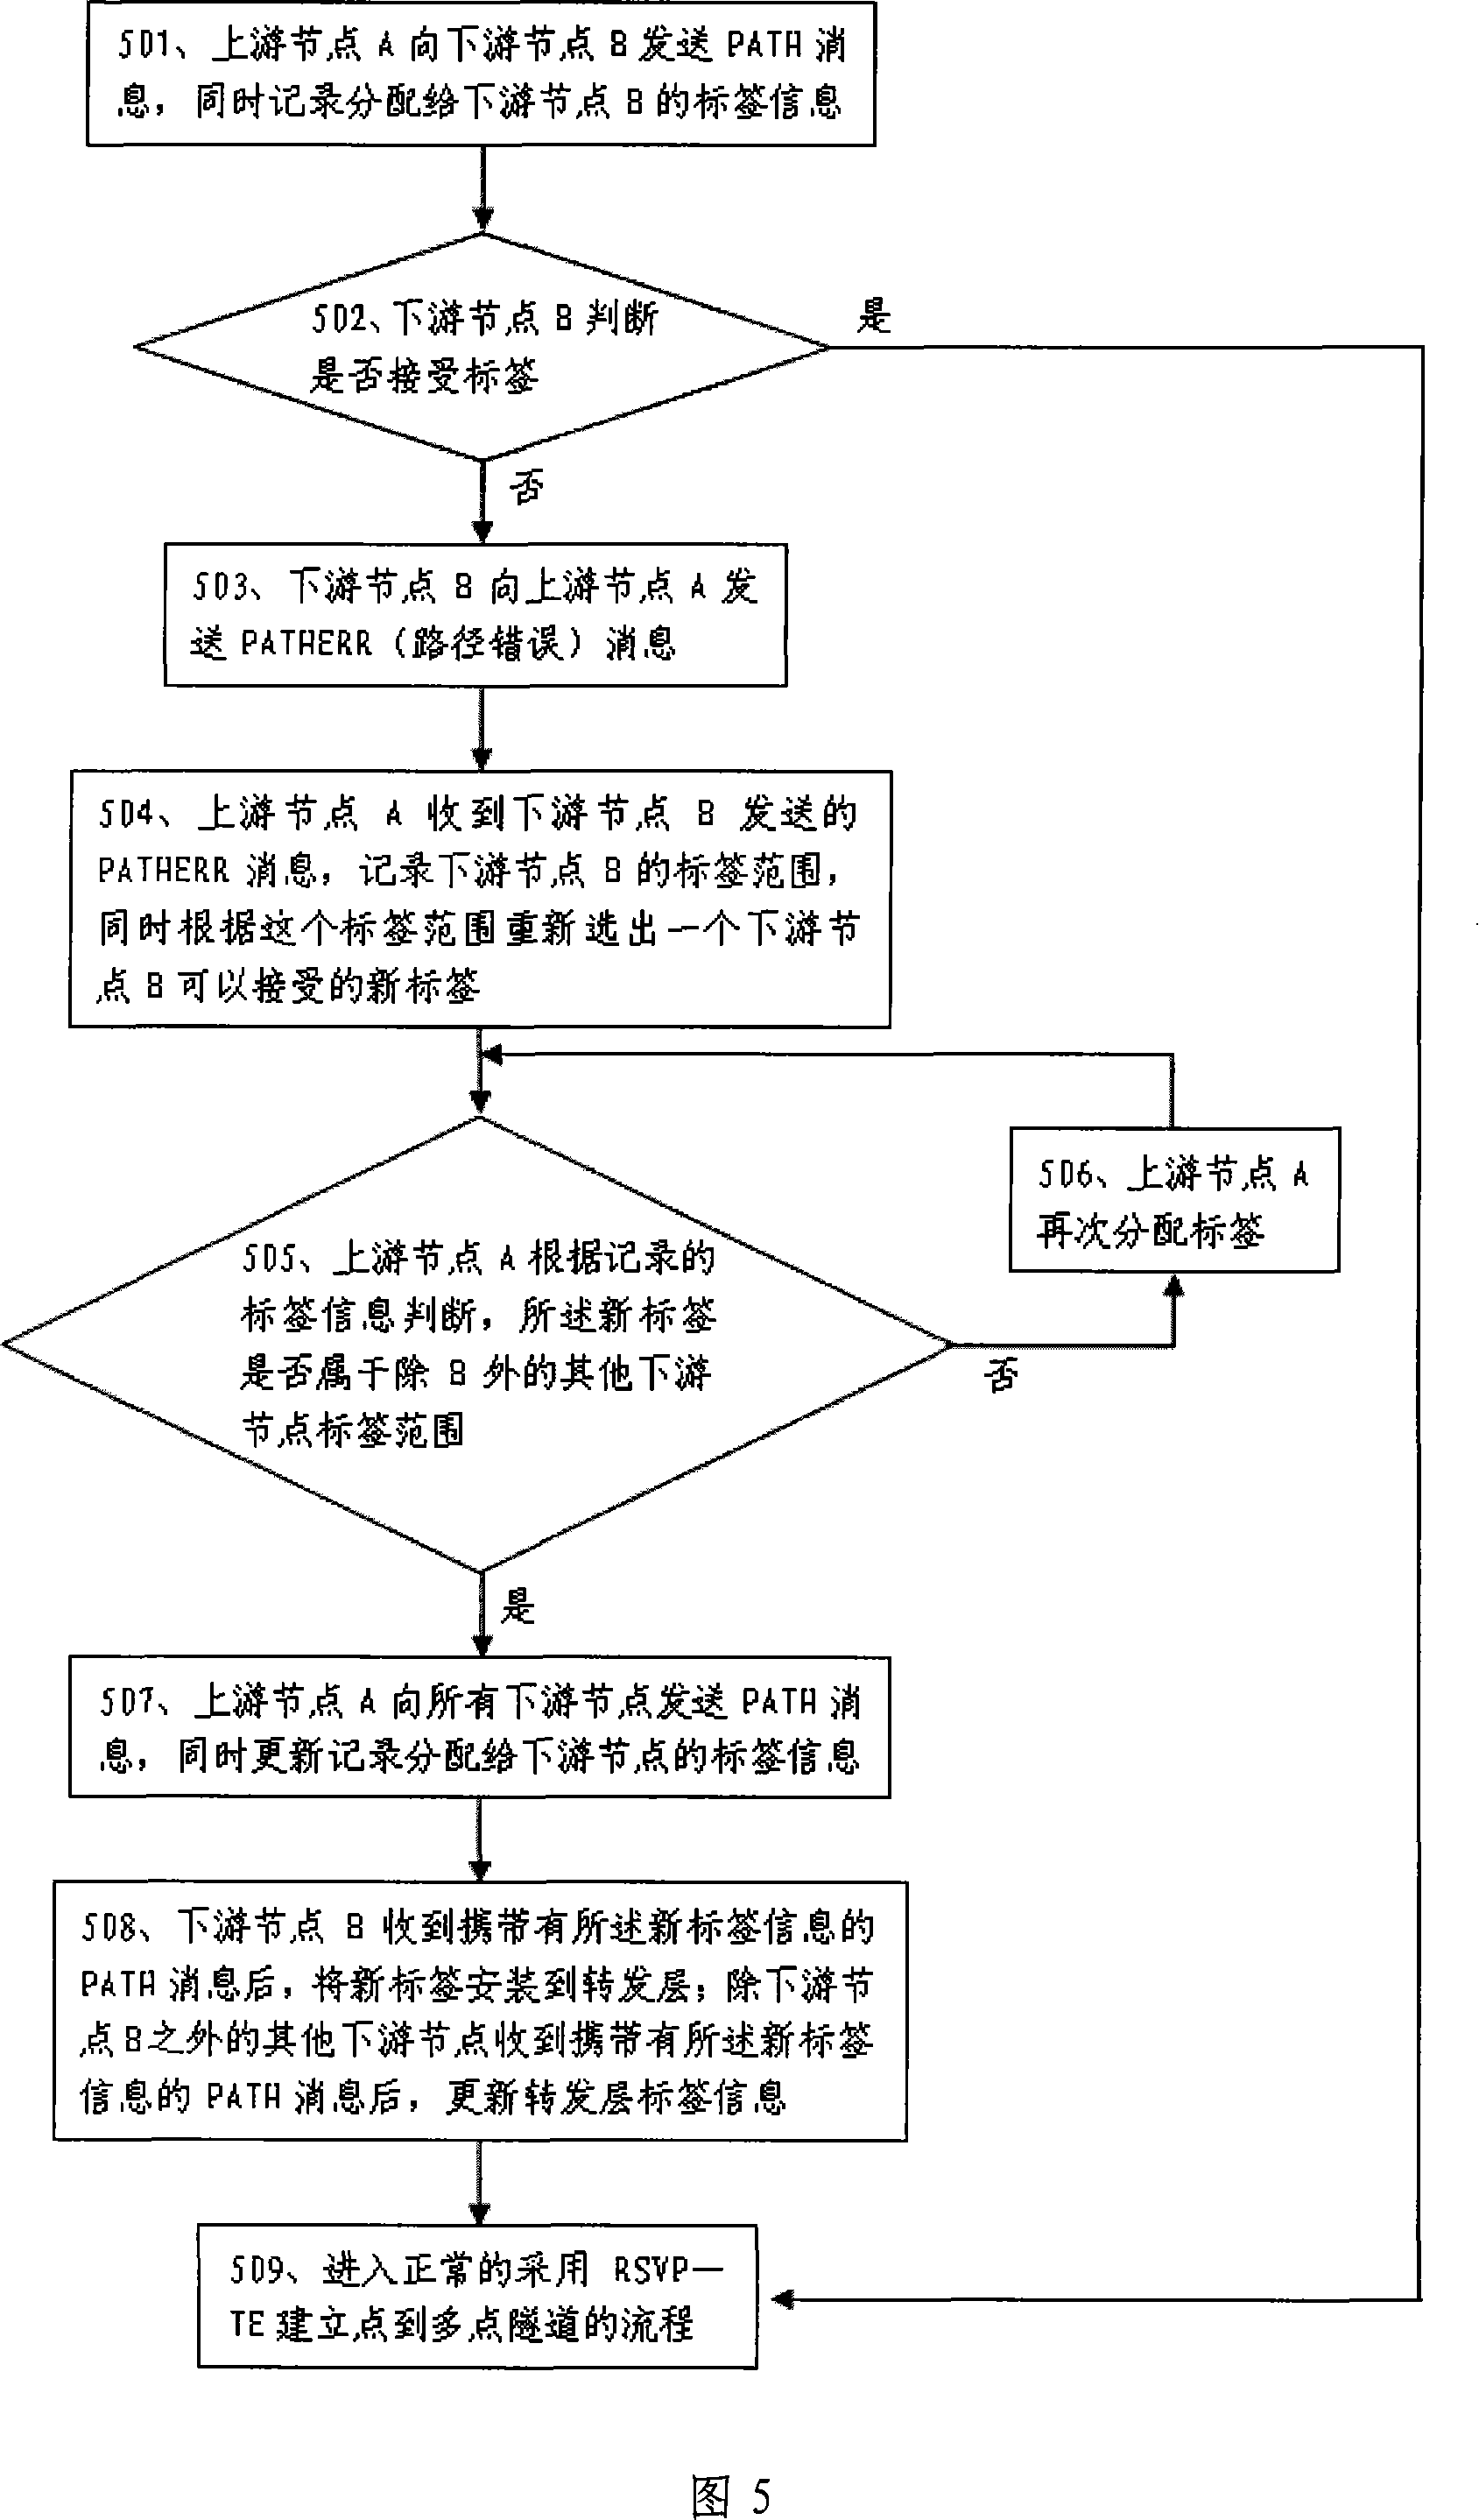 Upstream node label allocation method and system for point-to-point tunnel